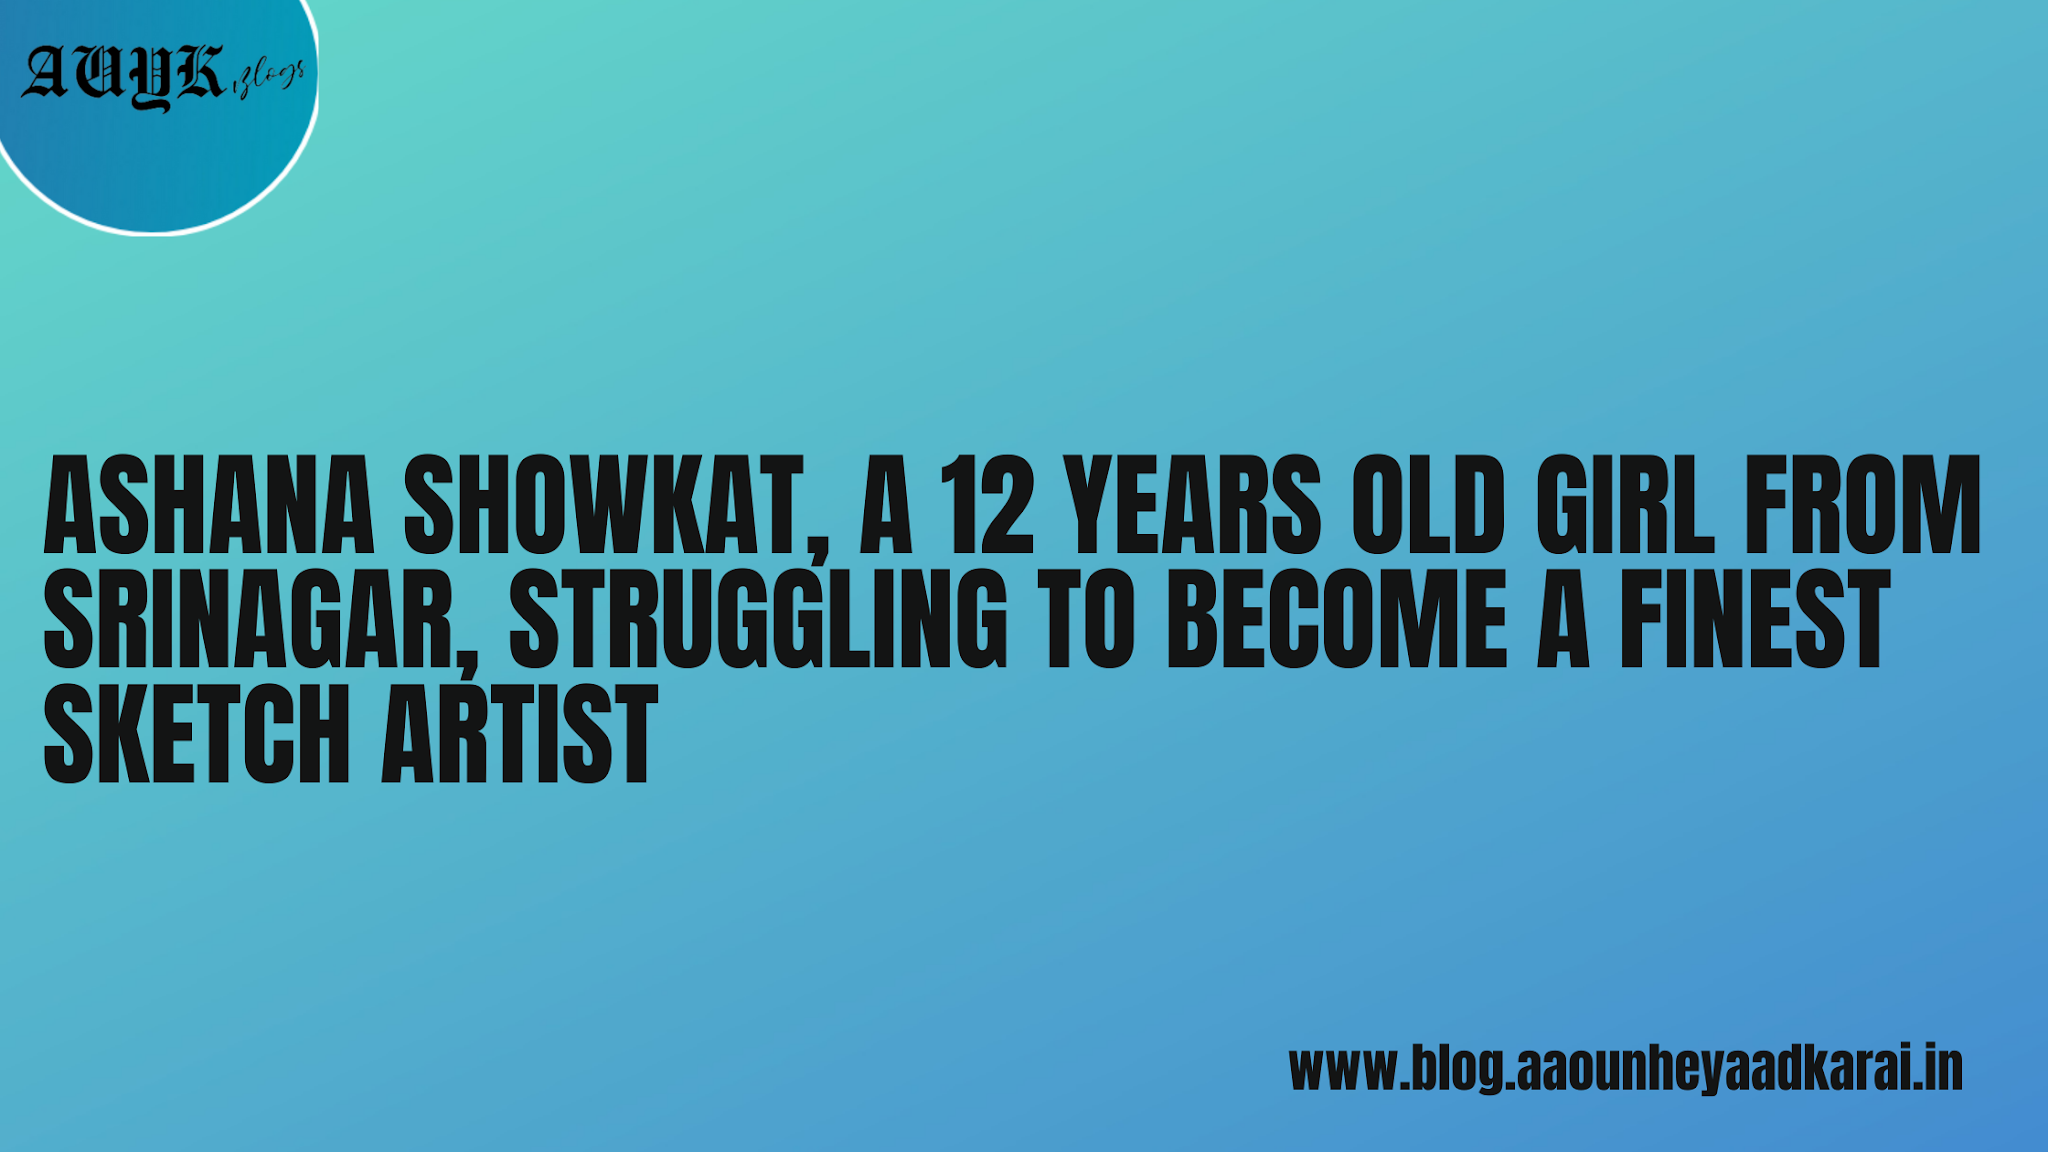 Ashana Showkat, A 12 years old girl from Srinagar, struggling to become a finest Sketch Artist